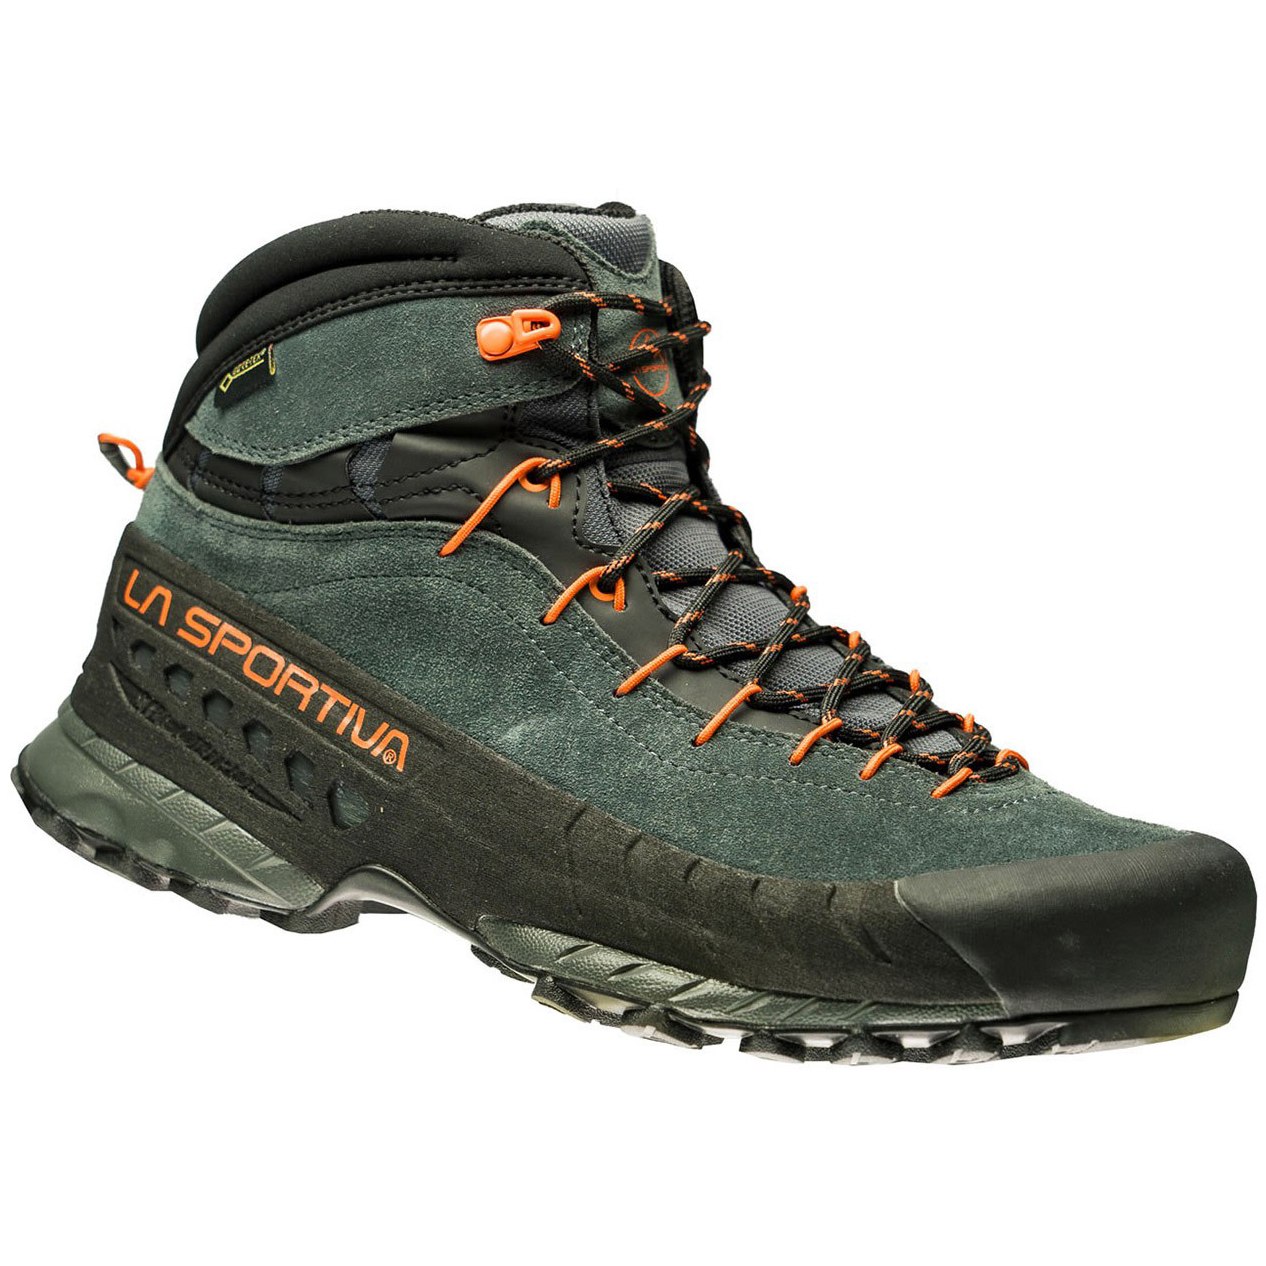 Image of La Sportiva TX4 Mid GTX Approach Shoes - Carbon/Flame